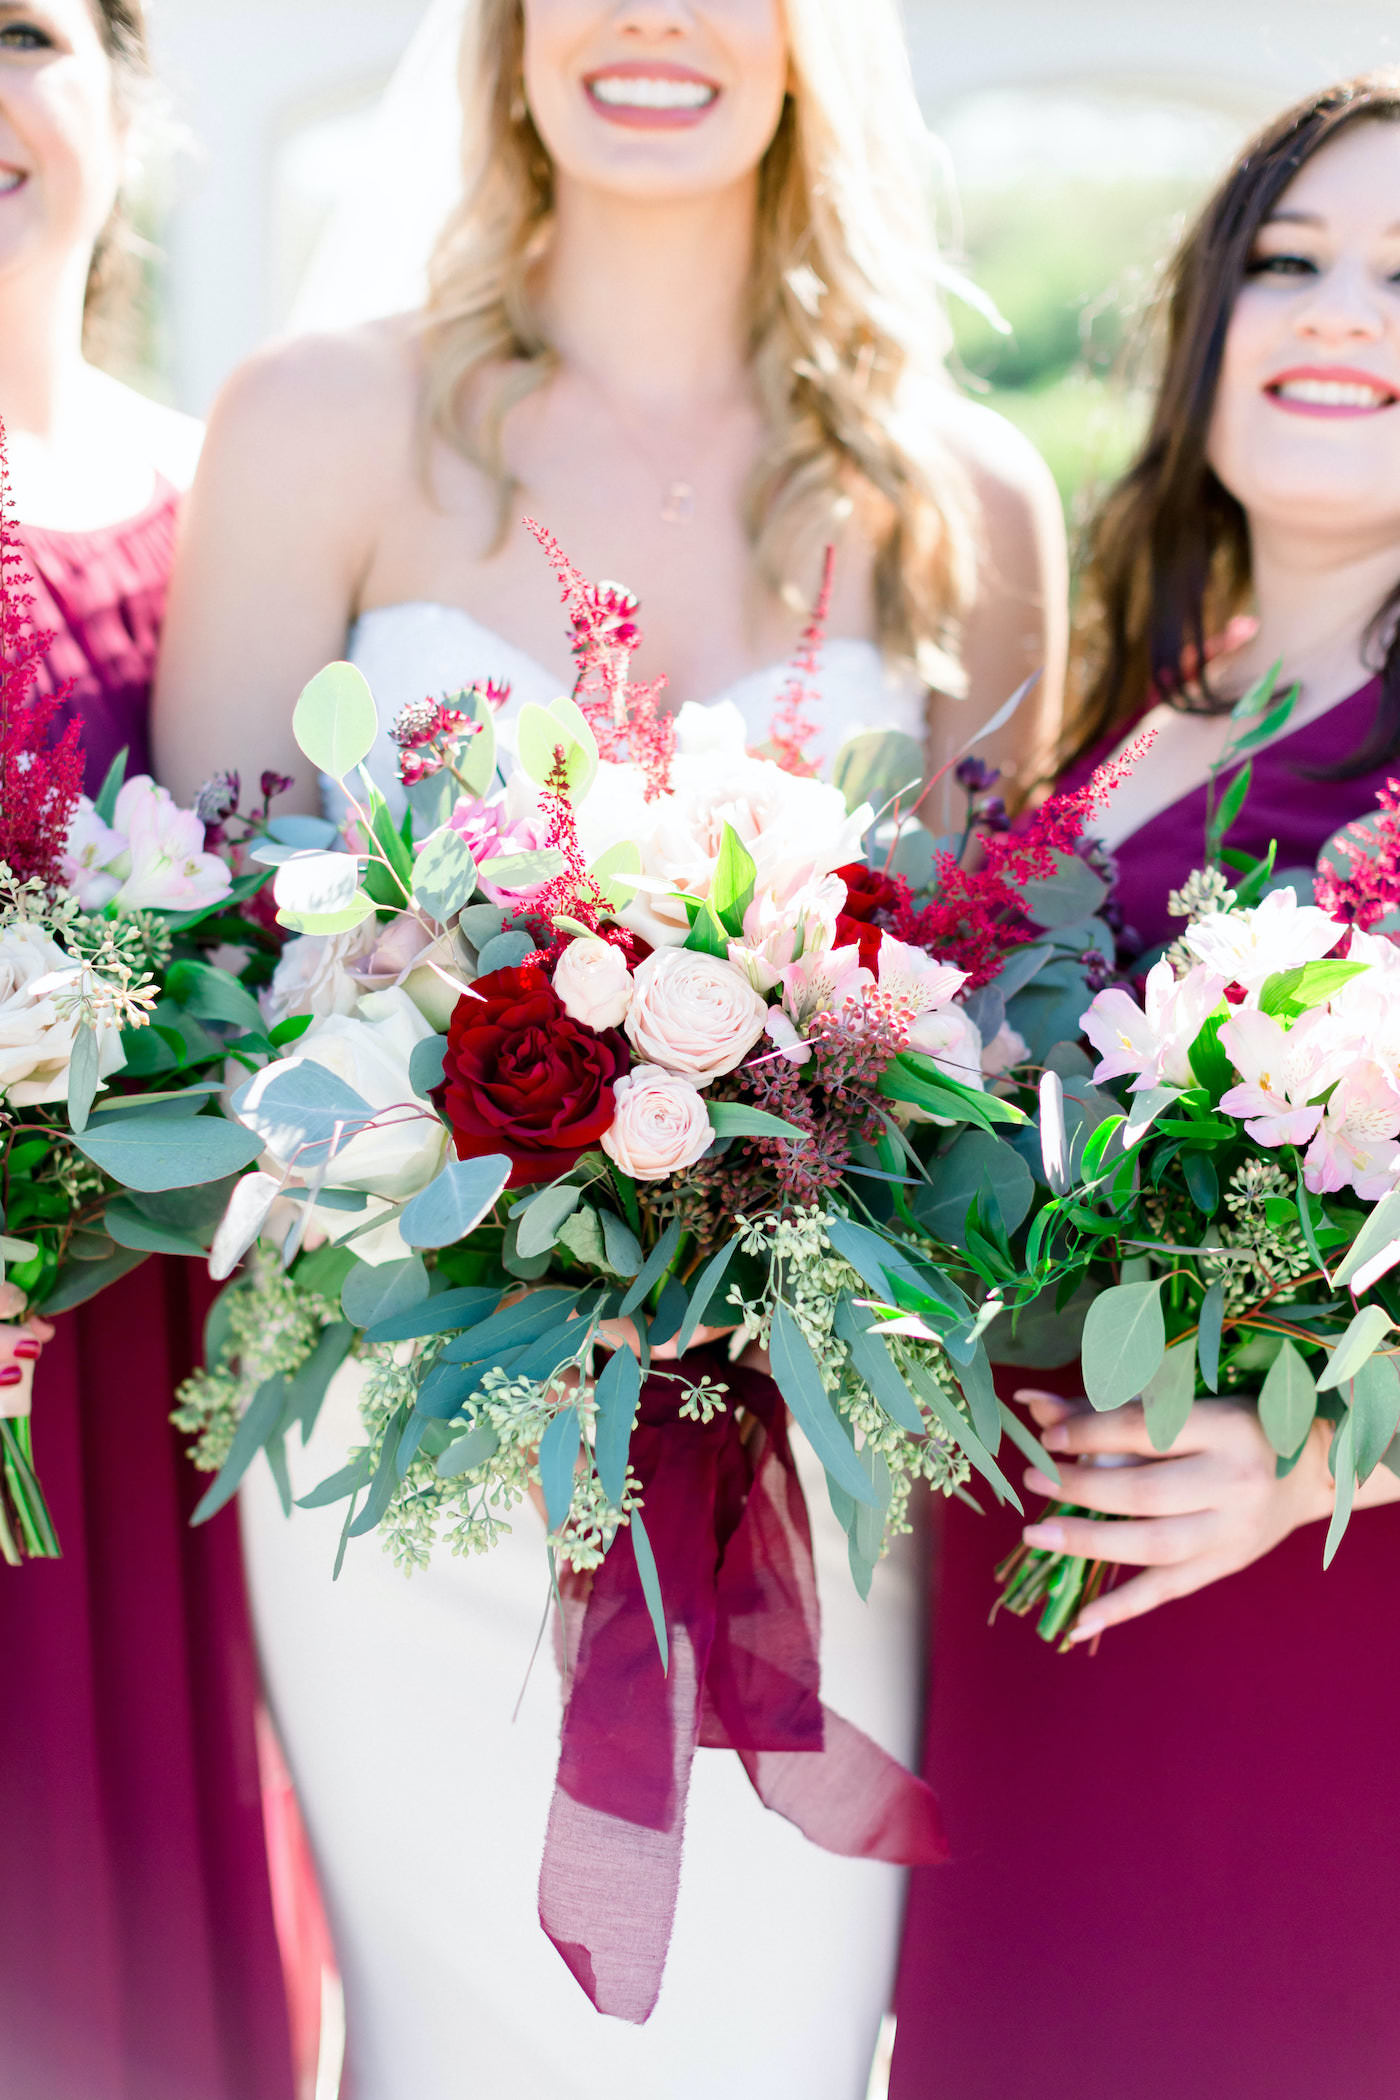 Burgundy and Blush Pink Wedding Bridal Bouquet with Roses and Astilbe and Seeded Eucalyptus Greenery | Shauna and Jordon Photography